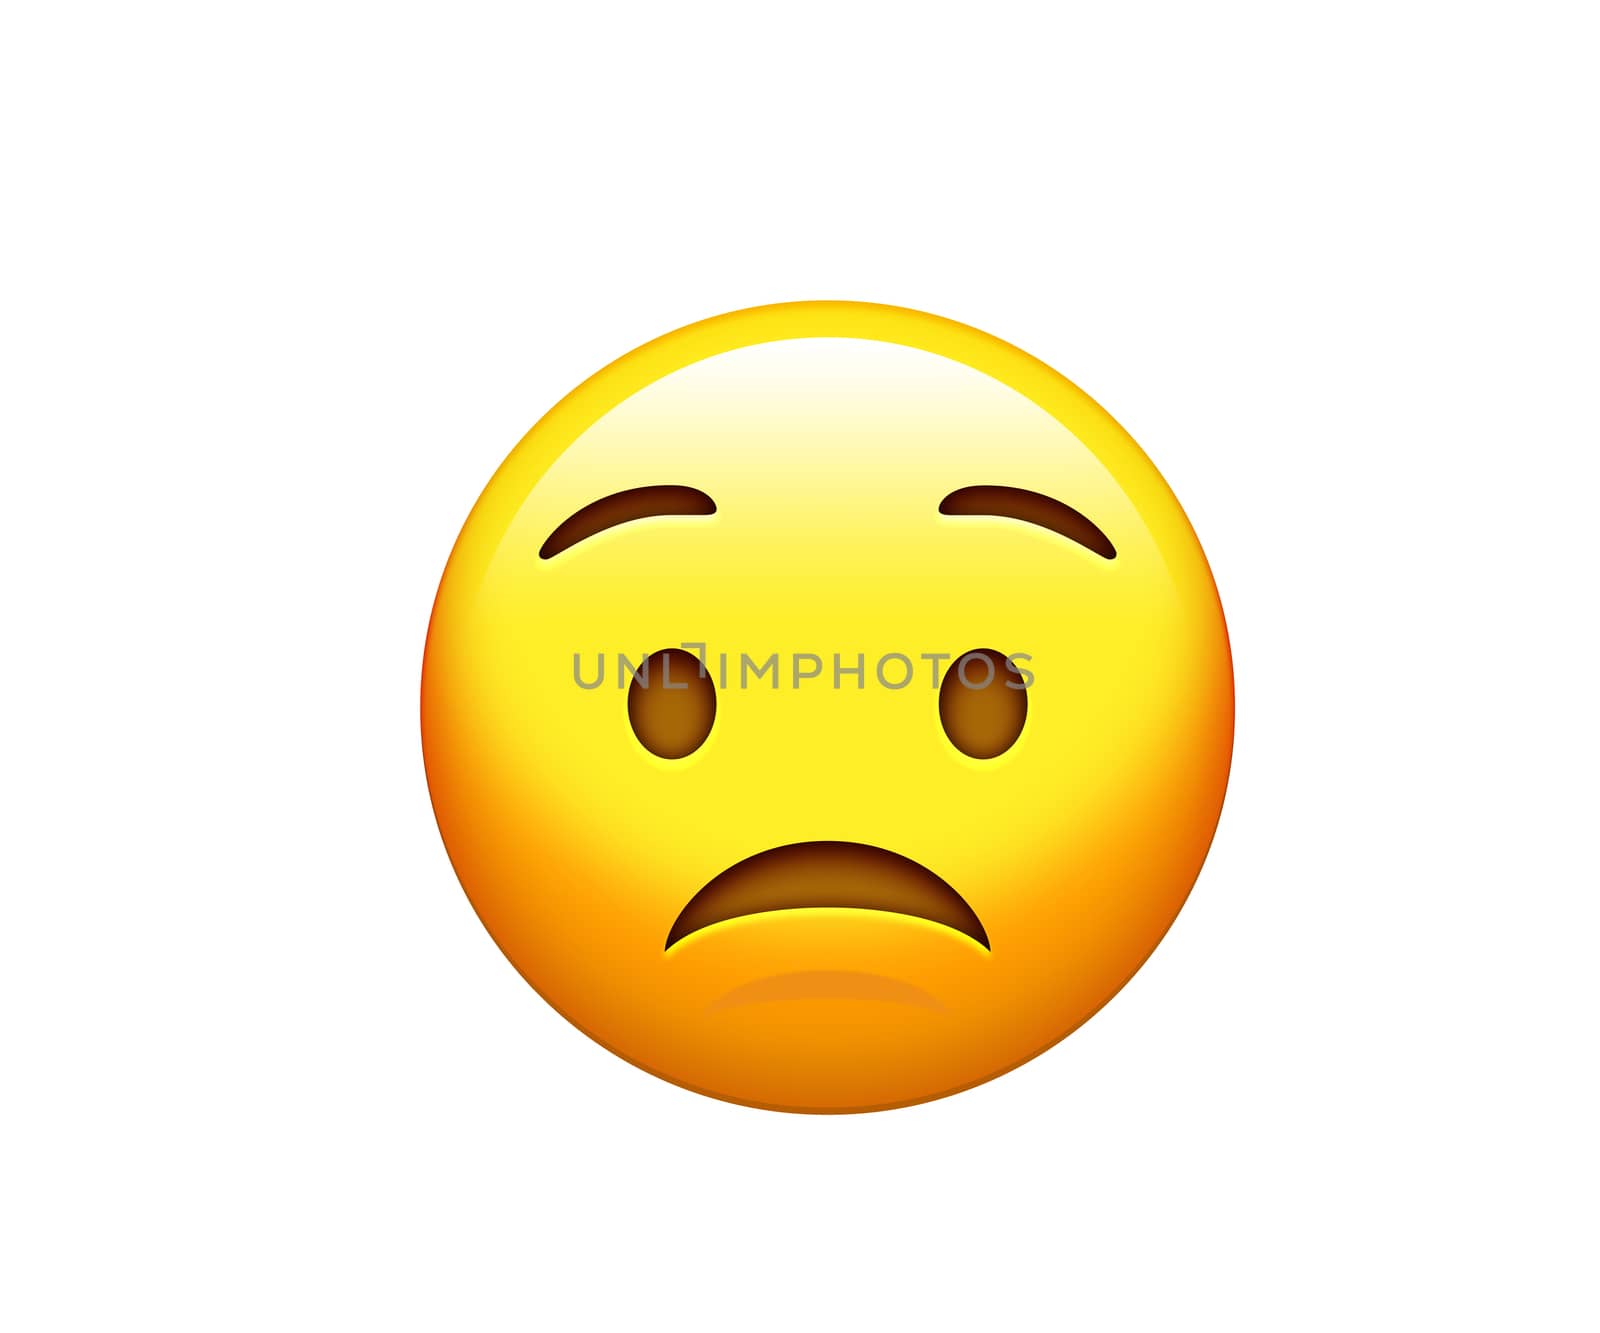 Emoji yellow sad, upset face with frown icon by cougarsan